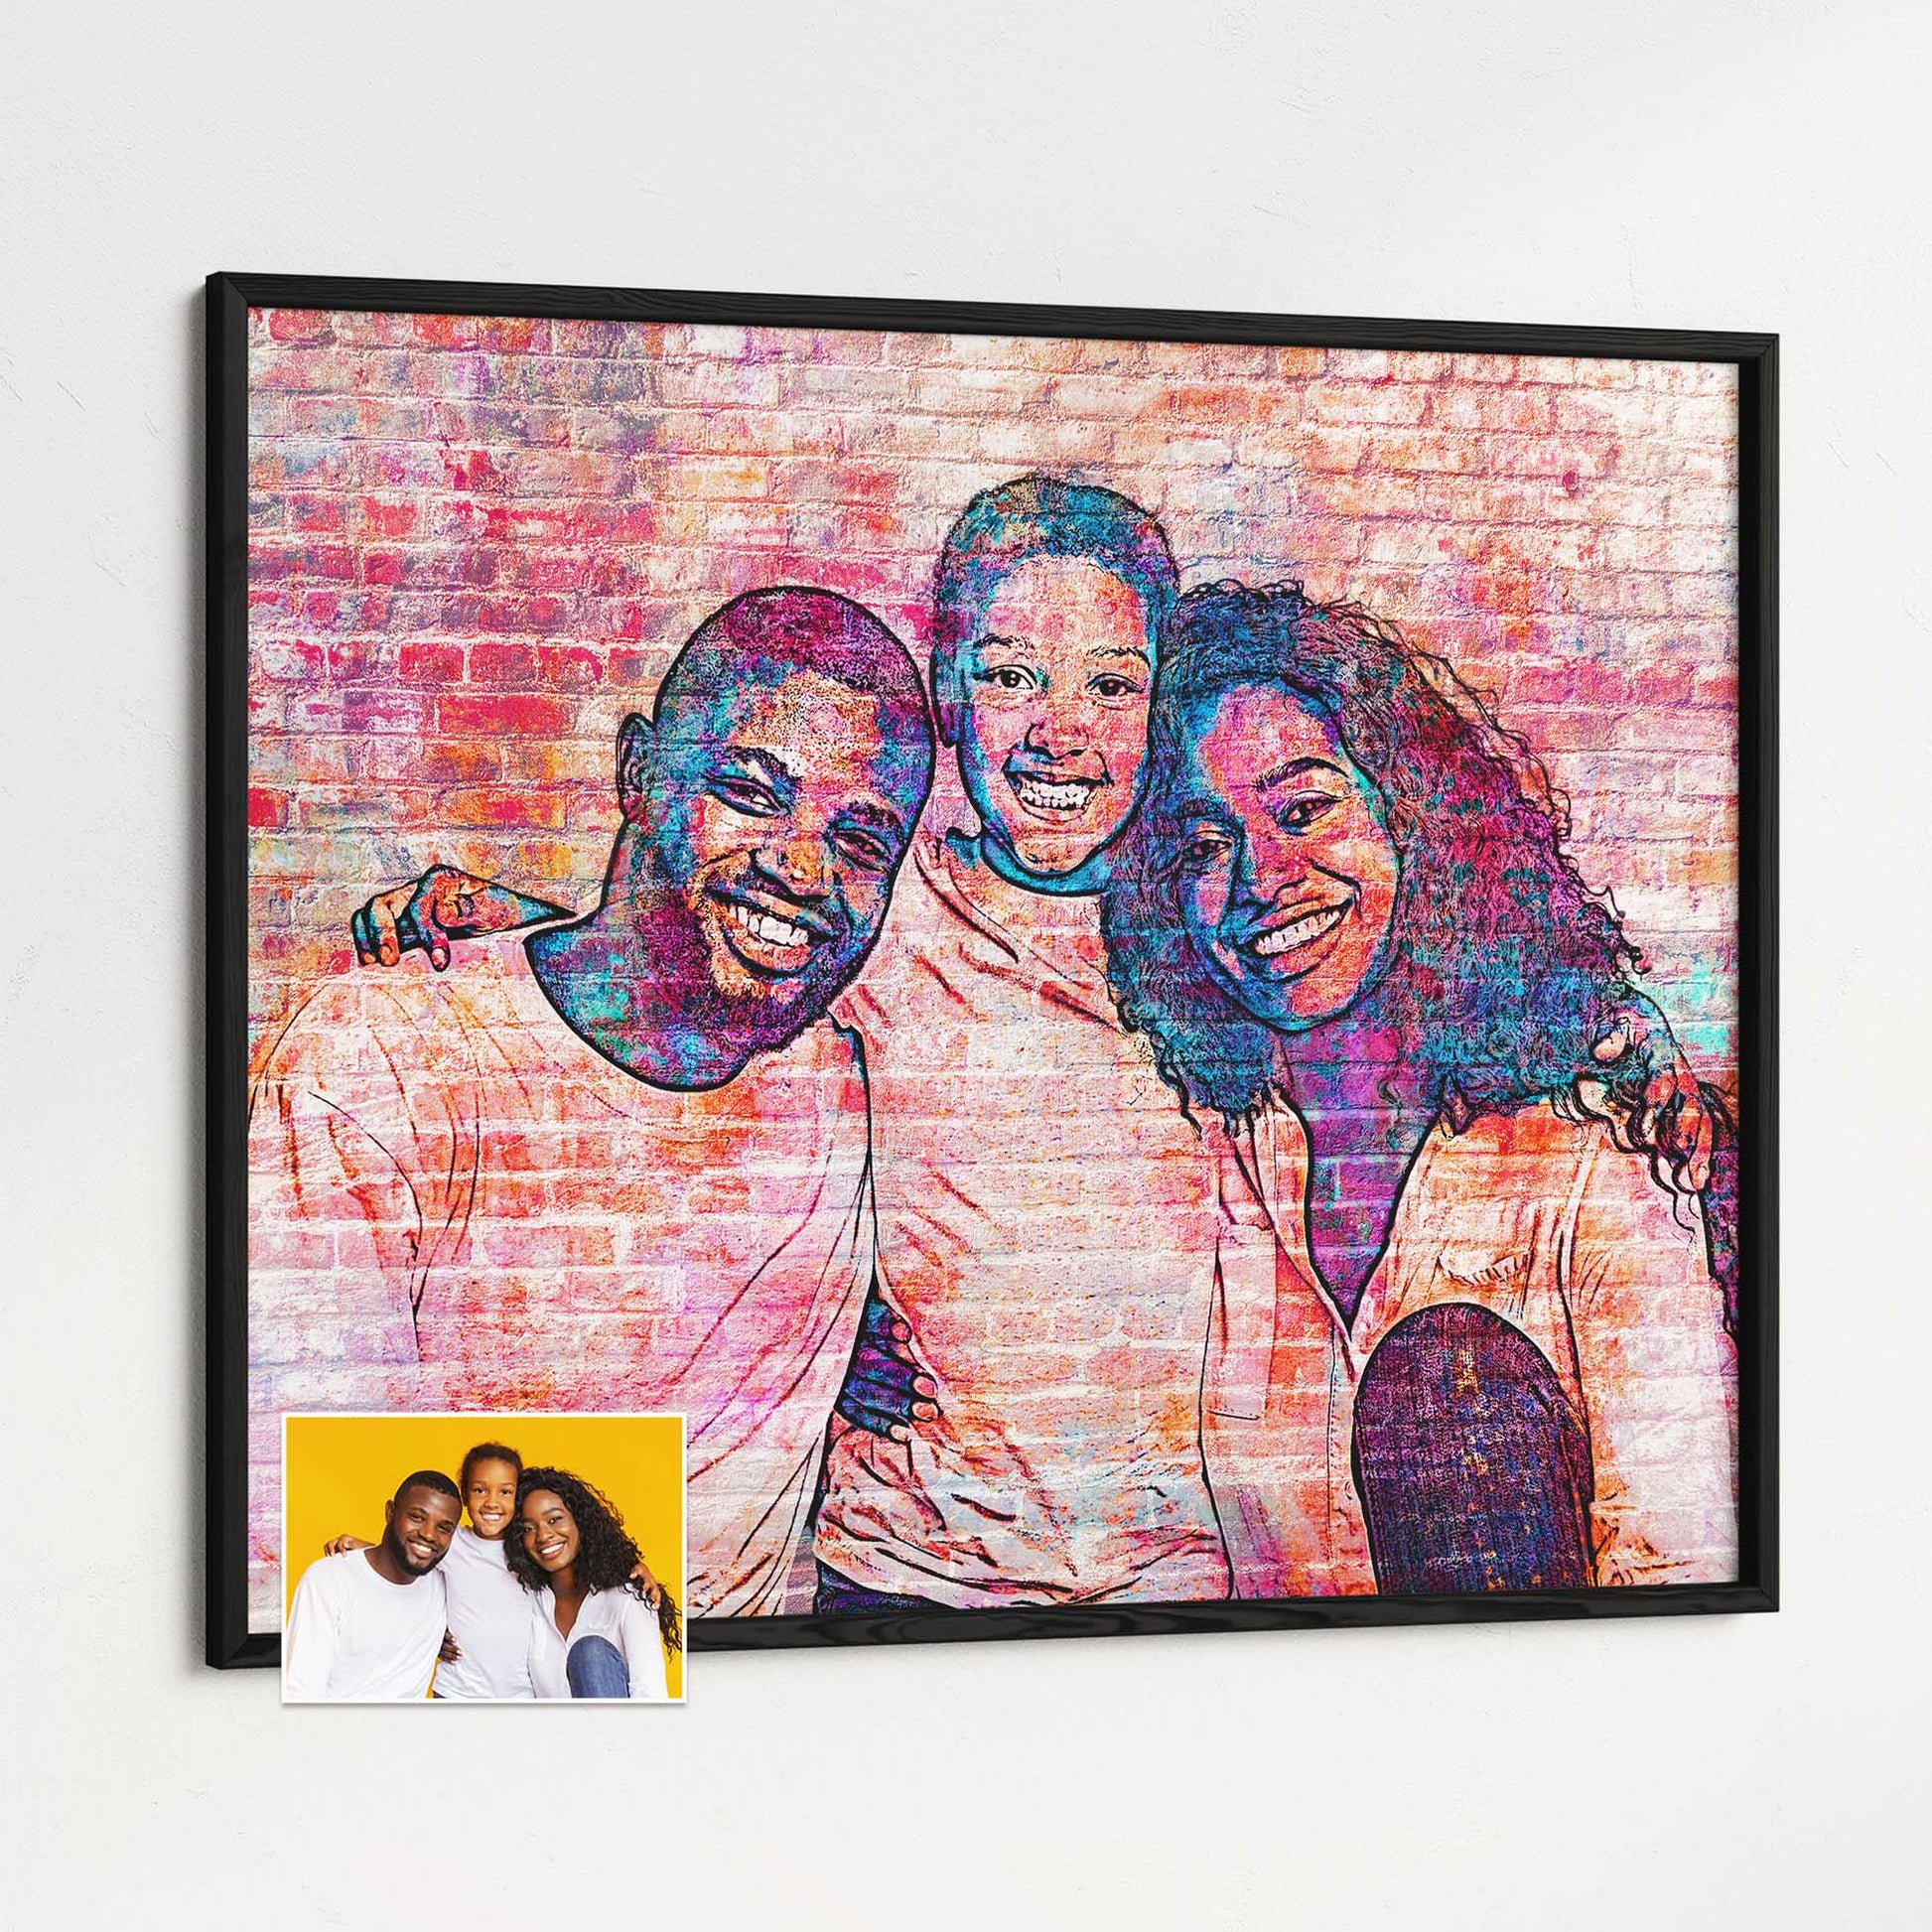 Make a statement with our Personalised Brick Graffiti Street Art Framed Print. The bold and imaginative design brings a burst of creativity to any space. Whether you're decorating your home or looking for a unique gift